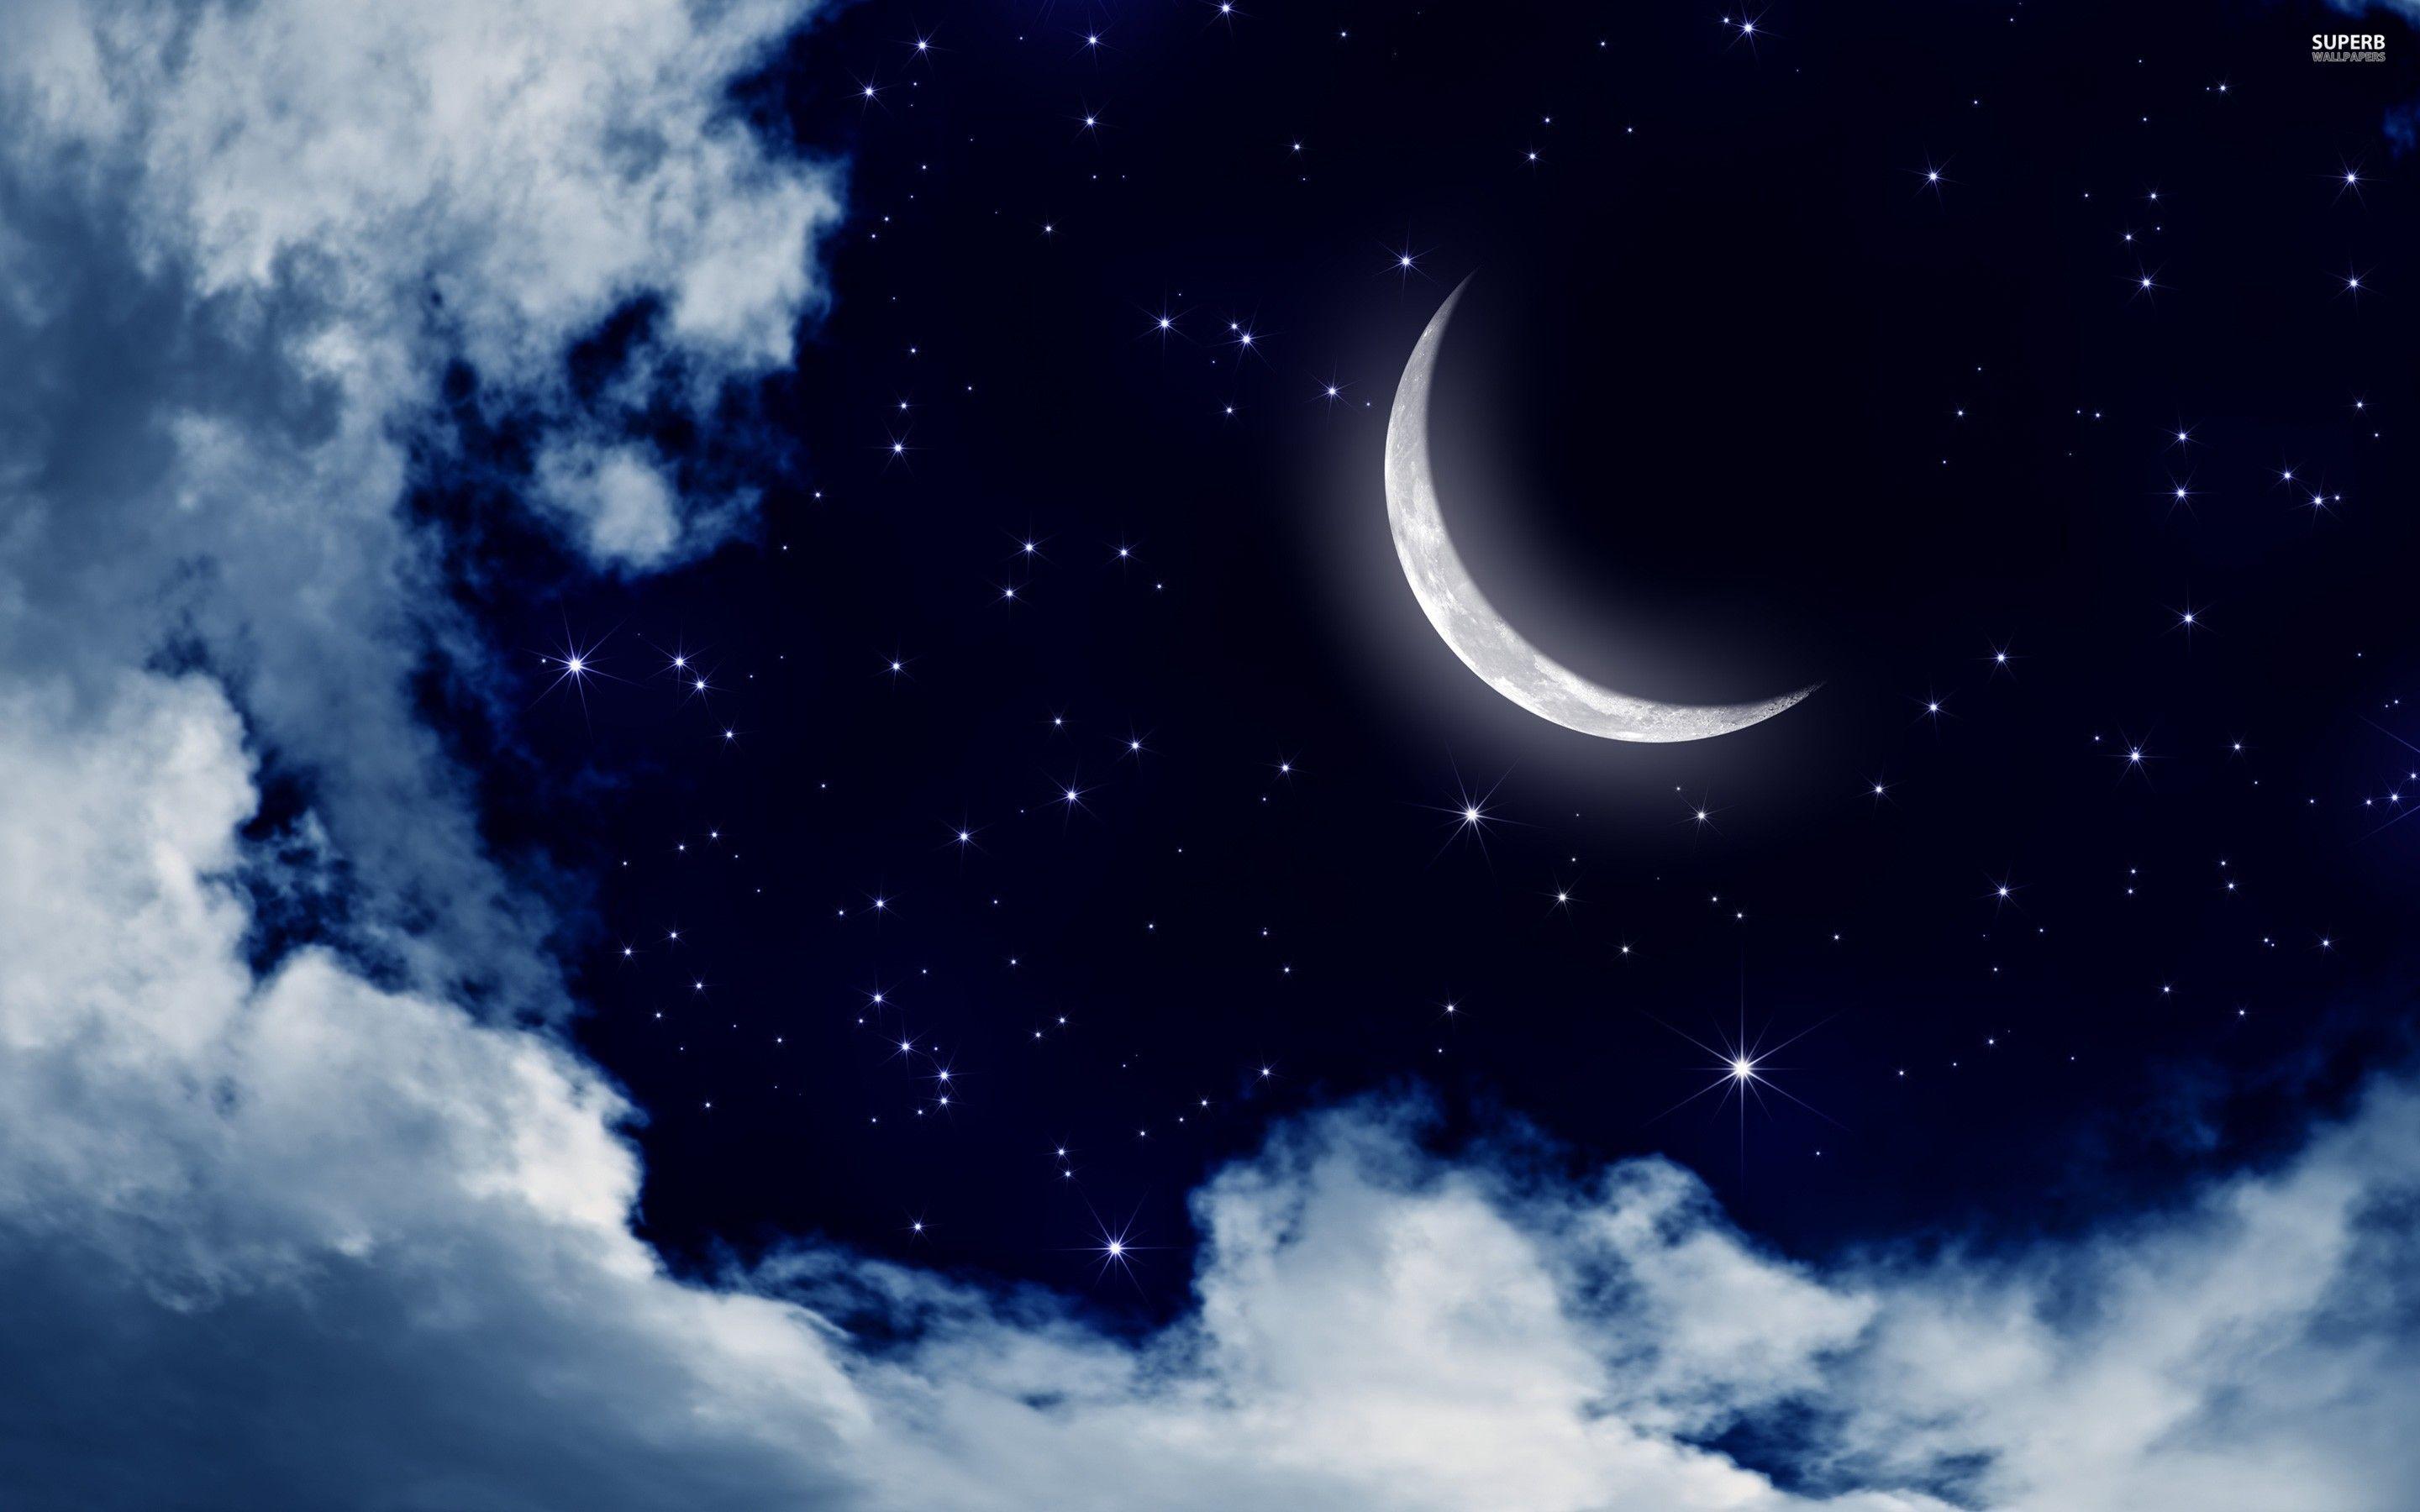 Moon and stars in the sky Art wallpaper. Moon and stars wallpaper, Star wallpaper, Sky moon